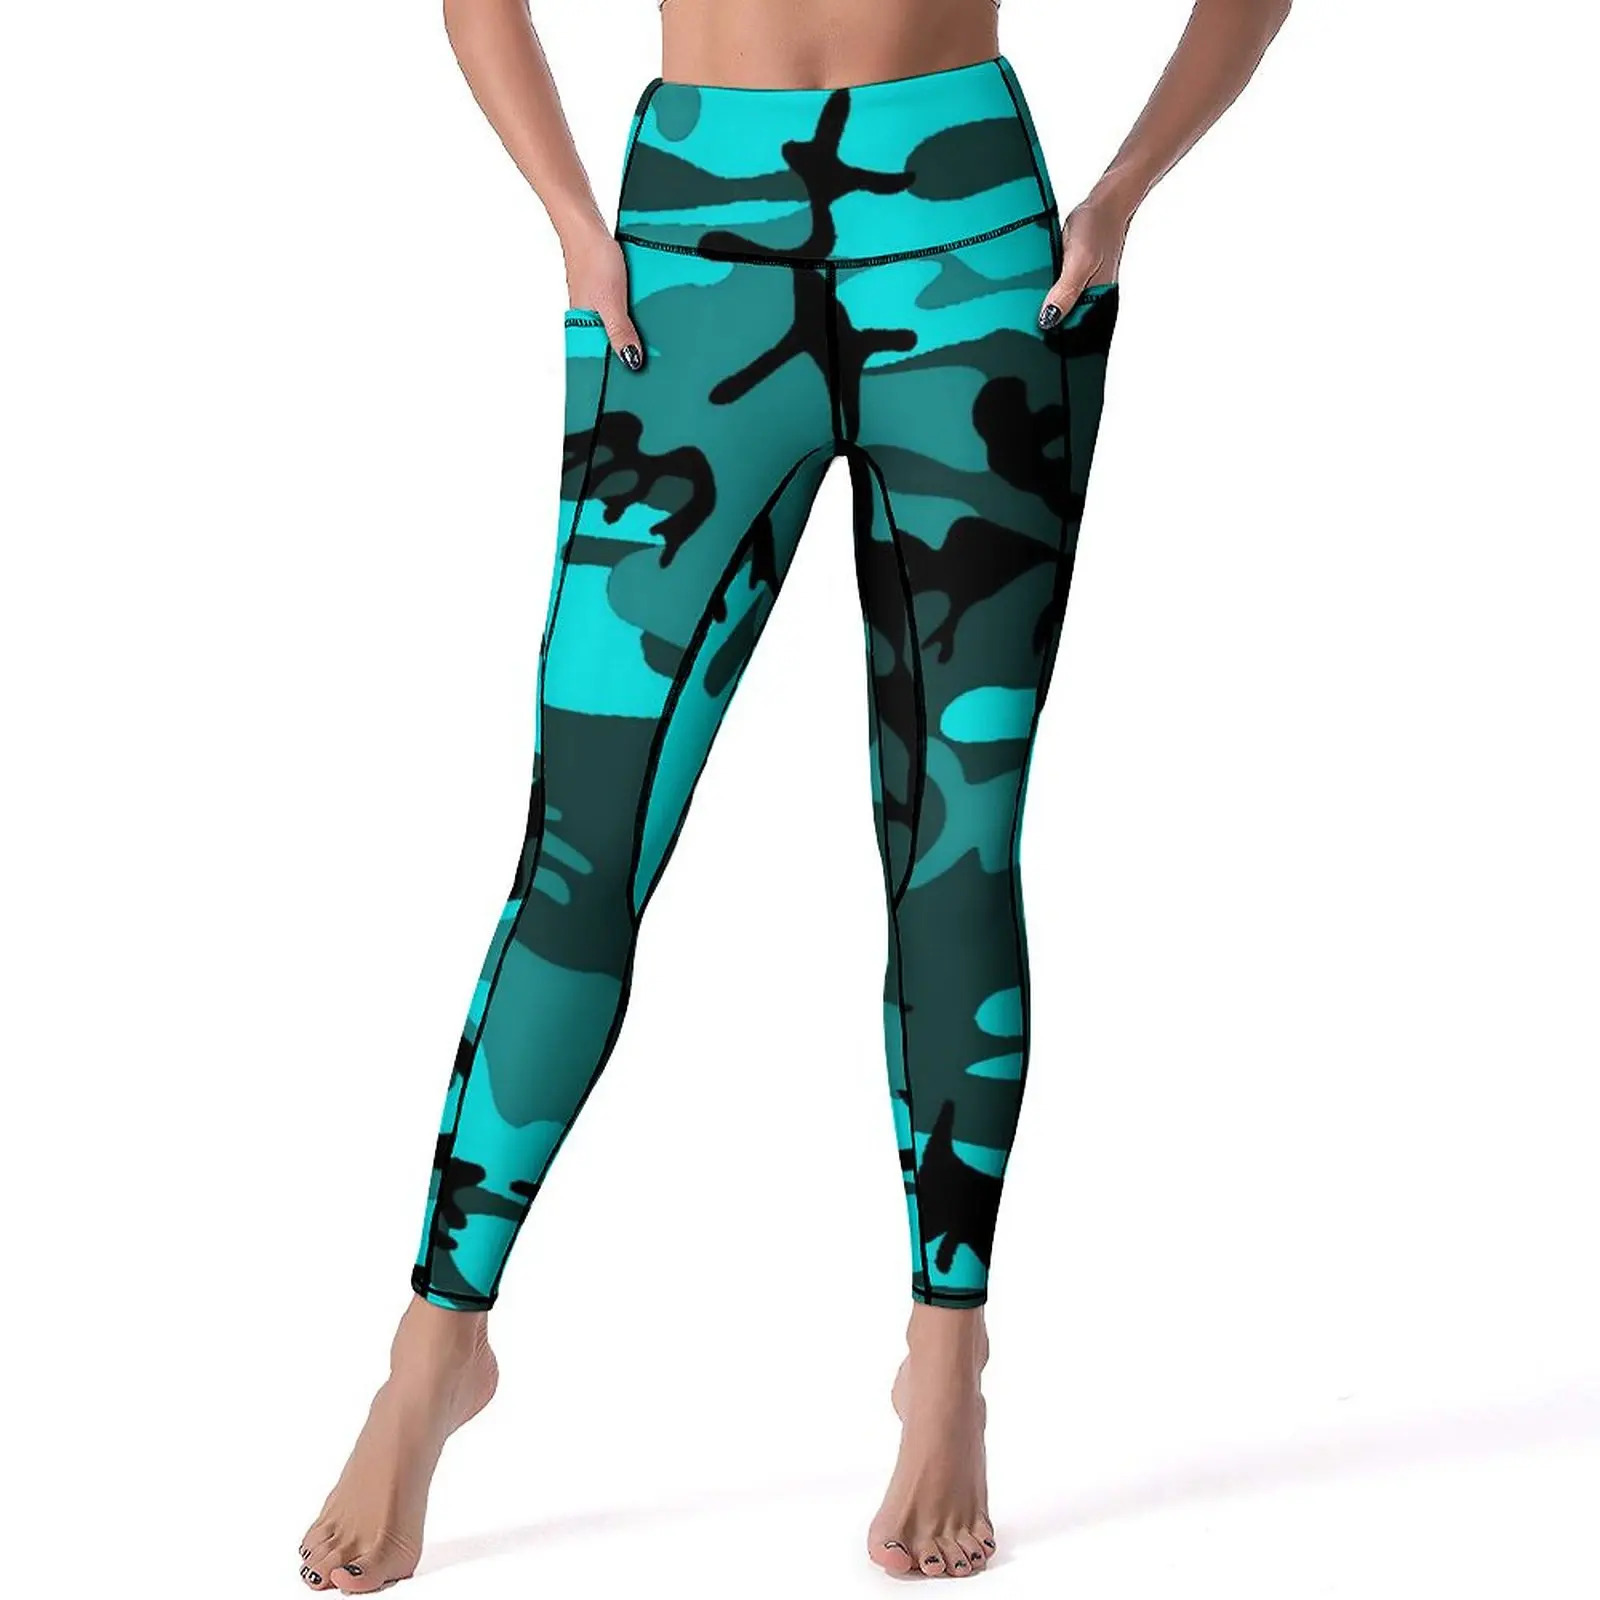 

Blue Camo Leggings Sexy Camouflage Print Push Up Yoga Pants Retro Stretchy Leggins Lady Graphic Workout Sports Tights